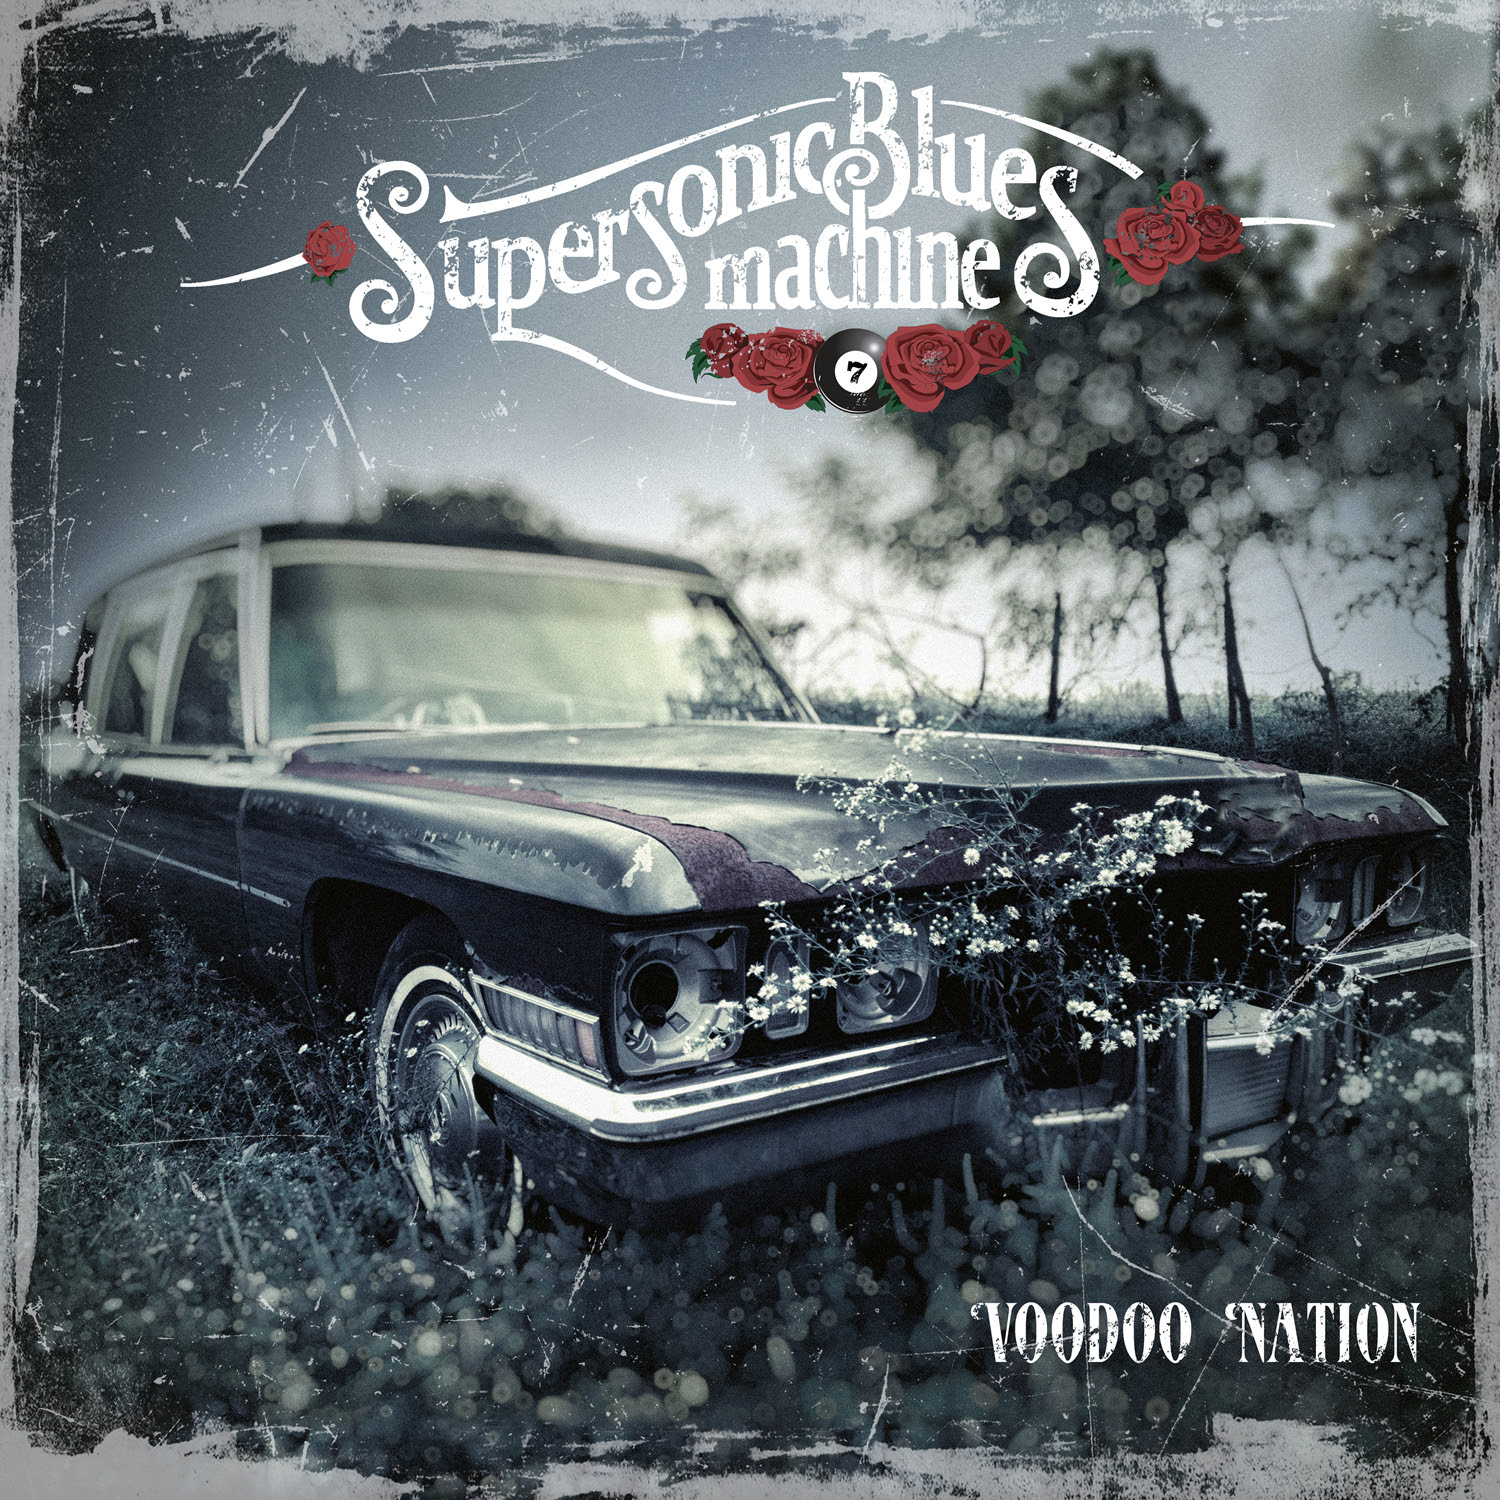 Eric Gales, Sonny Landreth, Ana Popovic, more on new Supersonic Blues Machine Album, Out 6/24